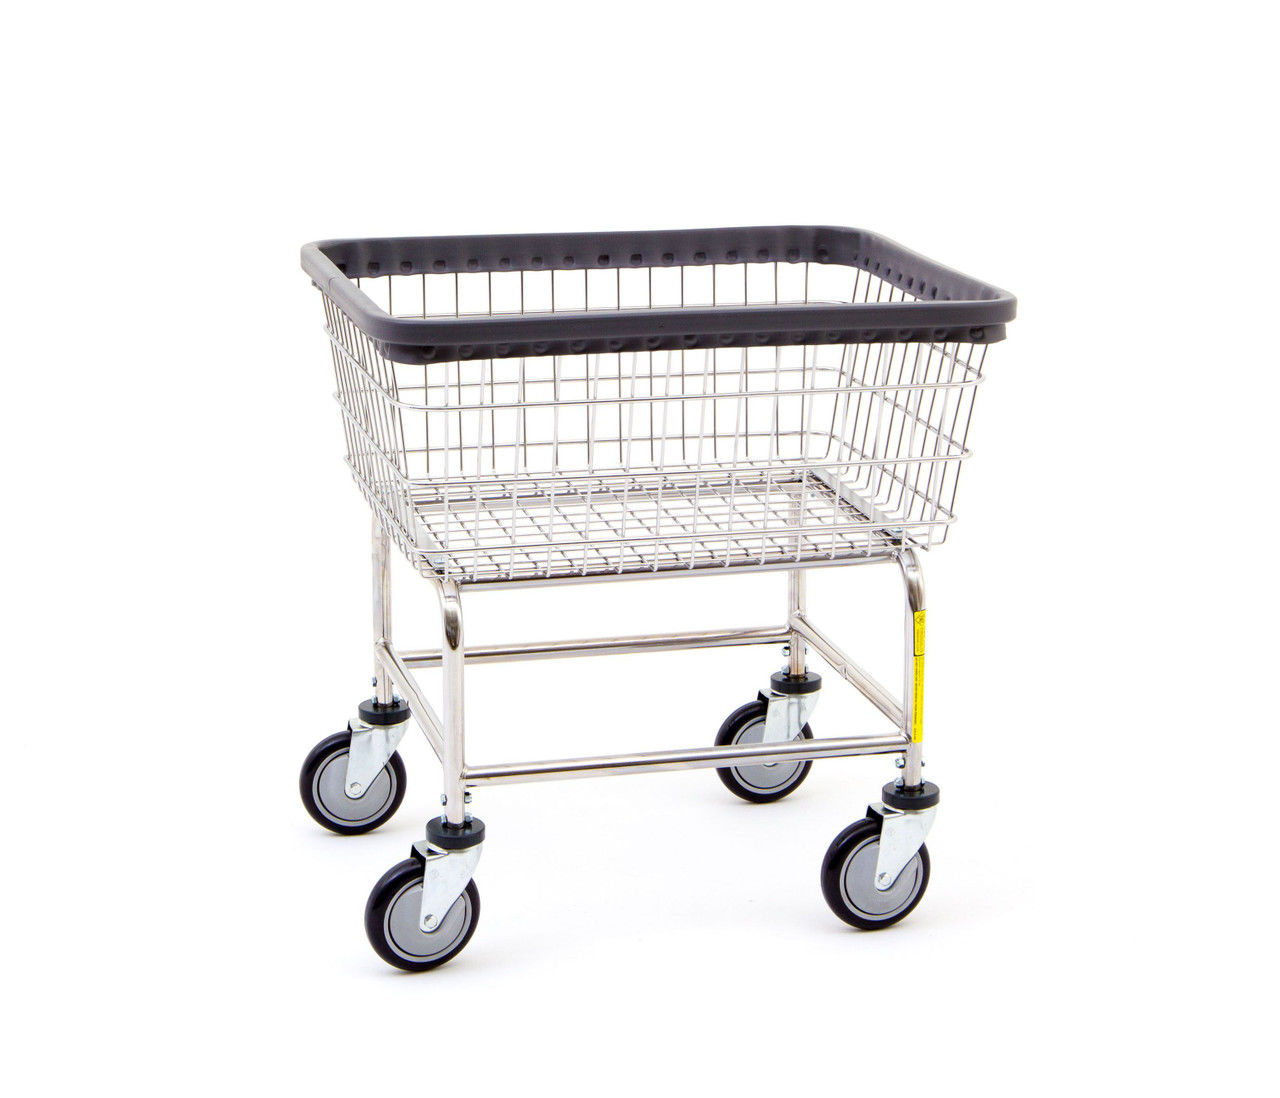 Is the assembly of the laundry cart on wheels difficult?